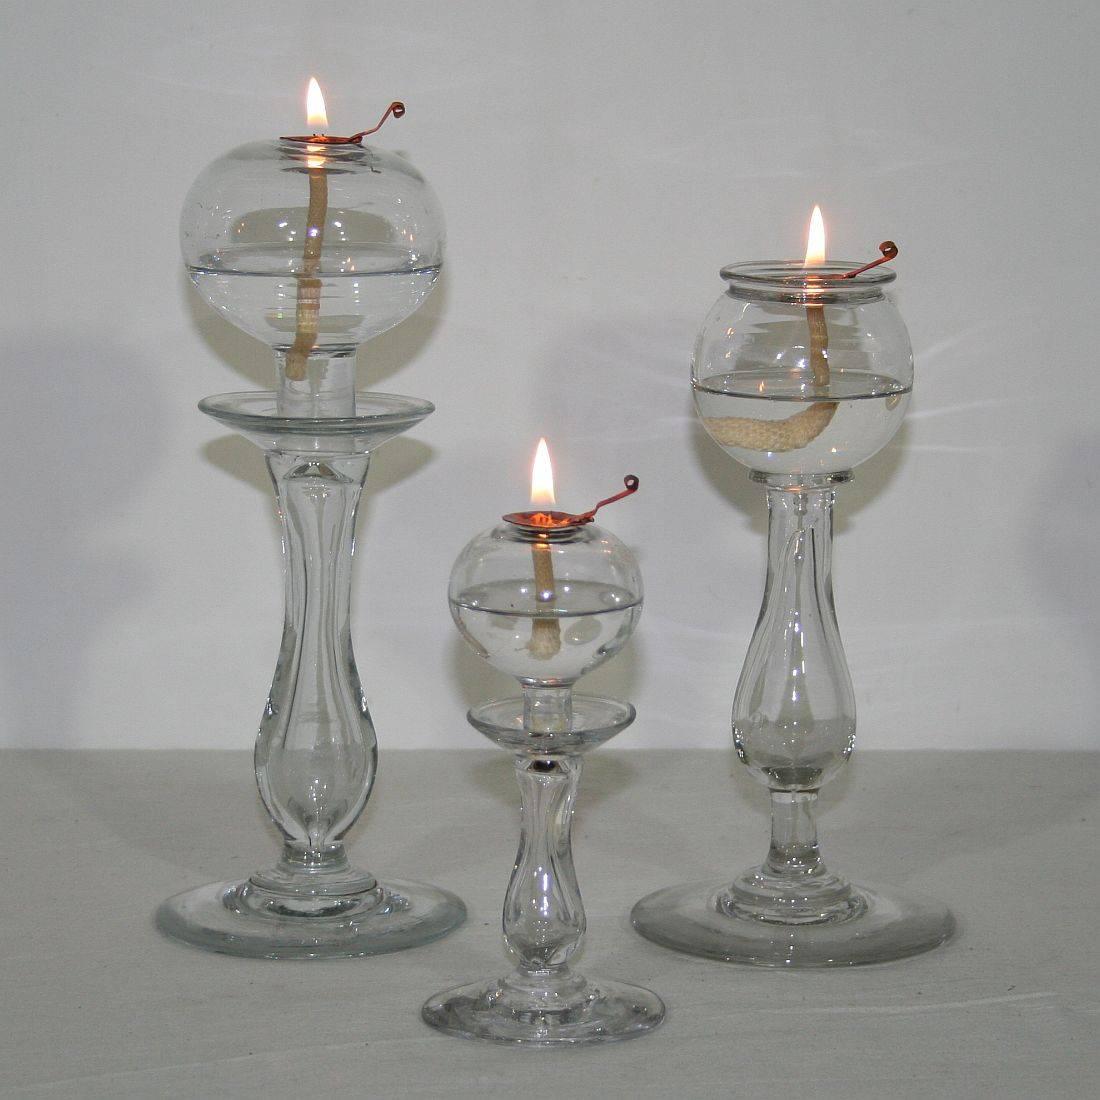 Rare collection of three handblown glass weaver oil lamps from the south of France, France, circa 1800-1900
Very good condition.